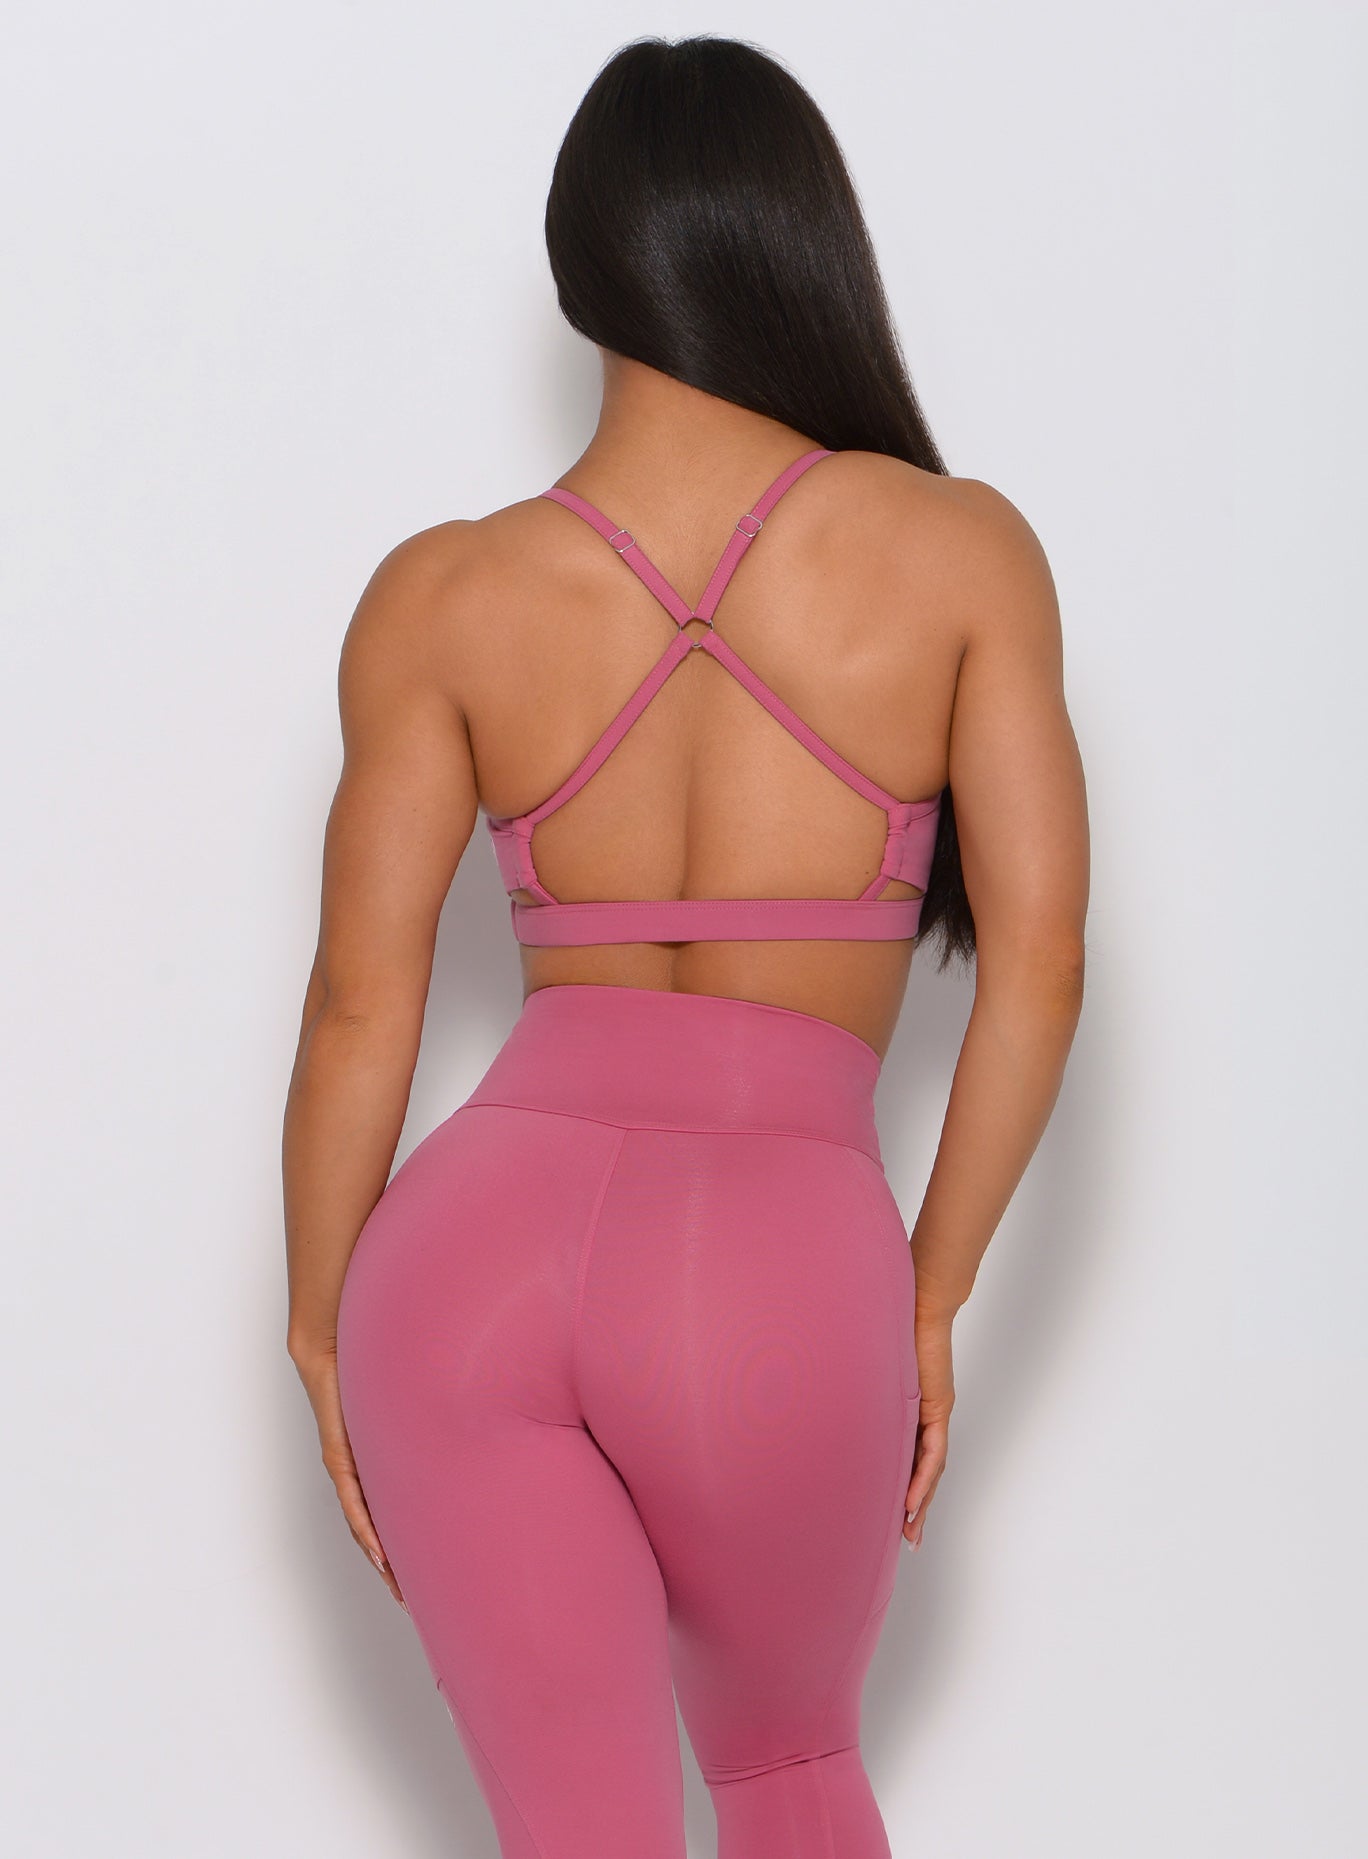 Back view of the model wearing our pumped sports bra in blush color and a matching high waist leggings